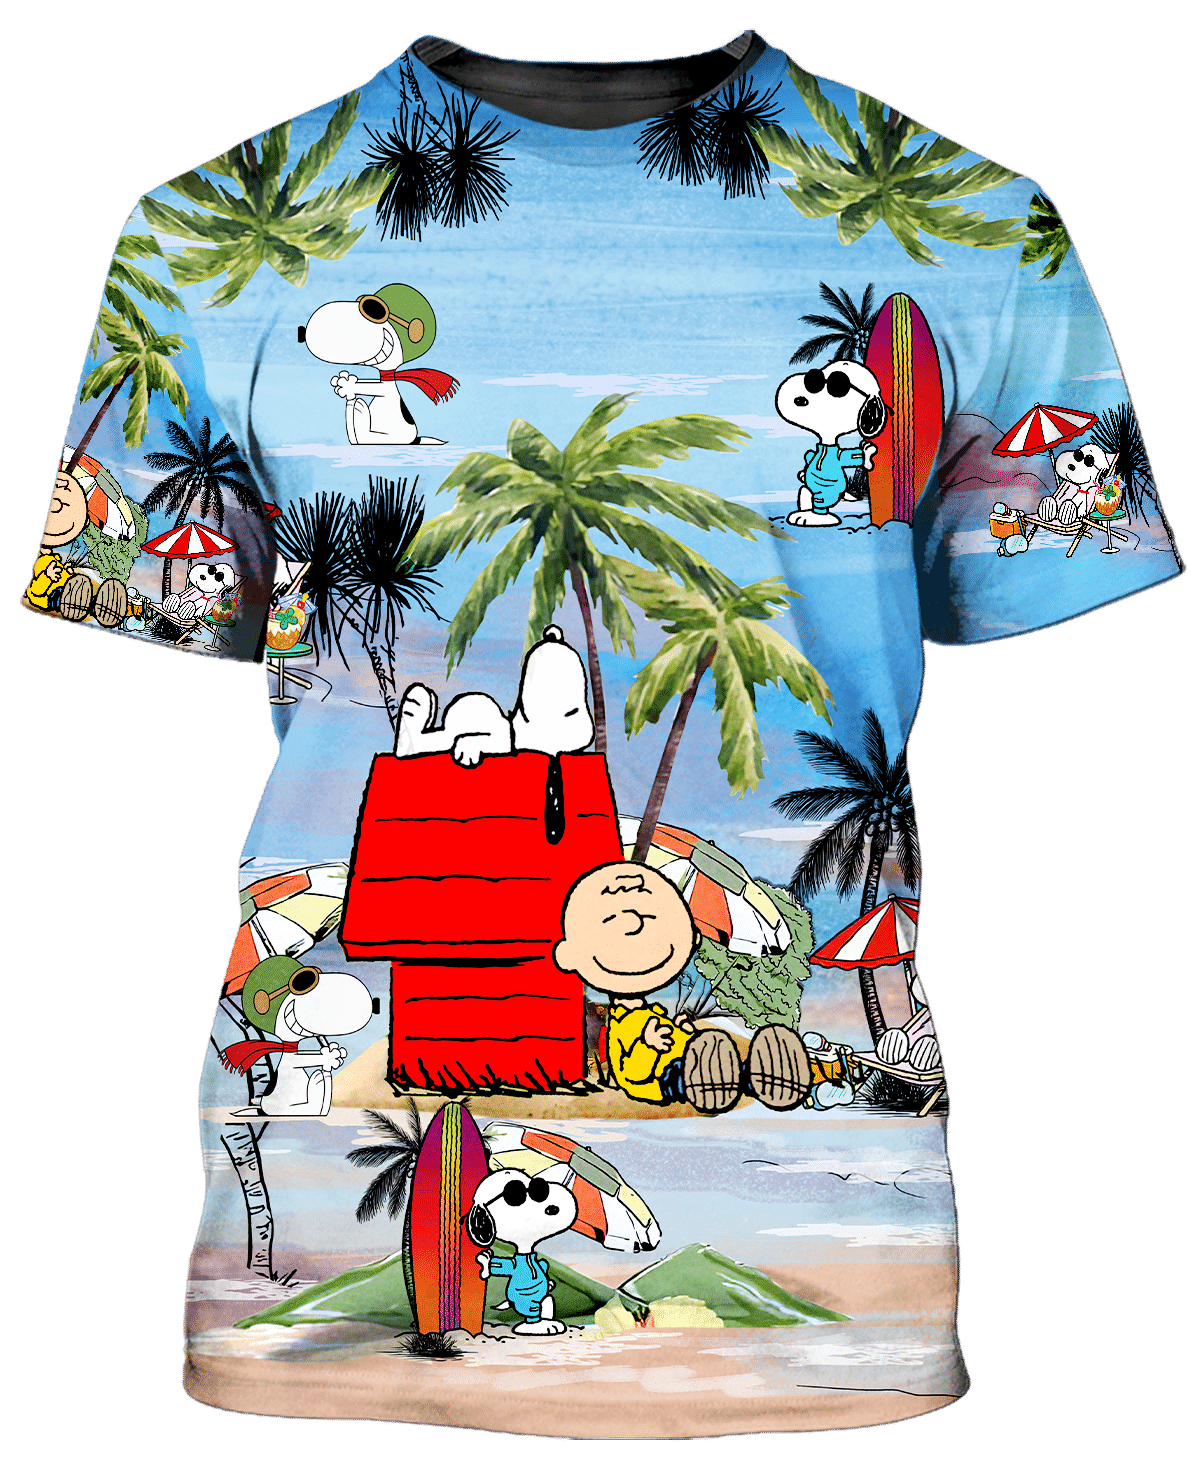 Snoopy and Charlie Brown summer time hoodie and shirt 1